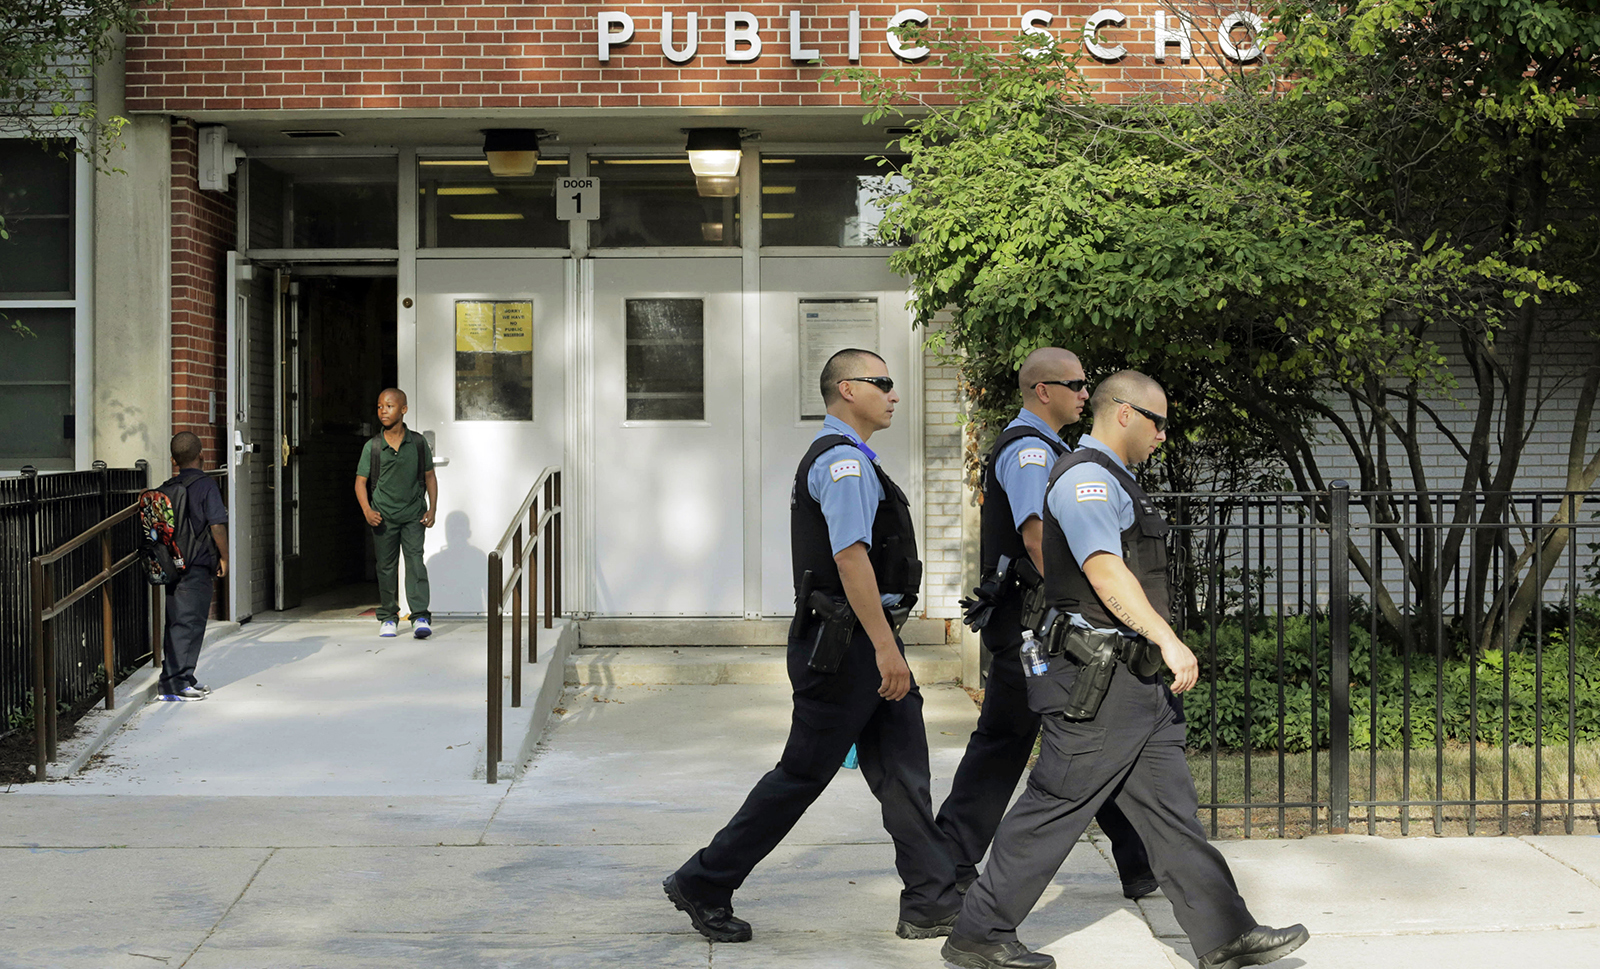 Chicago Police patrol the neighborhood as children arrive at Gresham Elementary School on the first day of classes, Monday, August 26, 2013, in Chicago. (AP/M. Spencer Green)